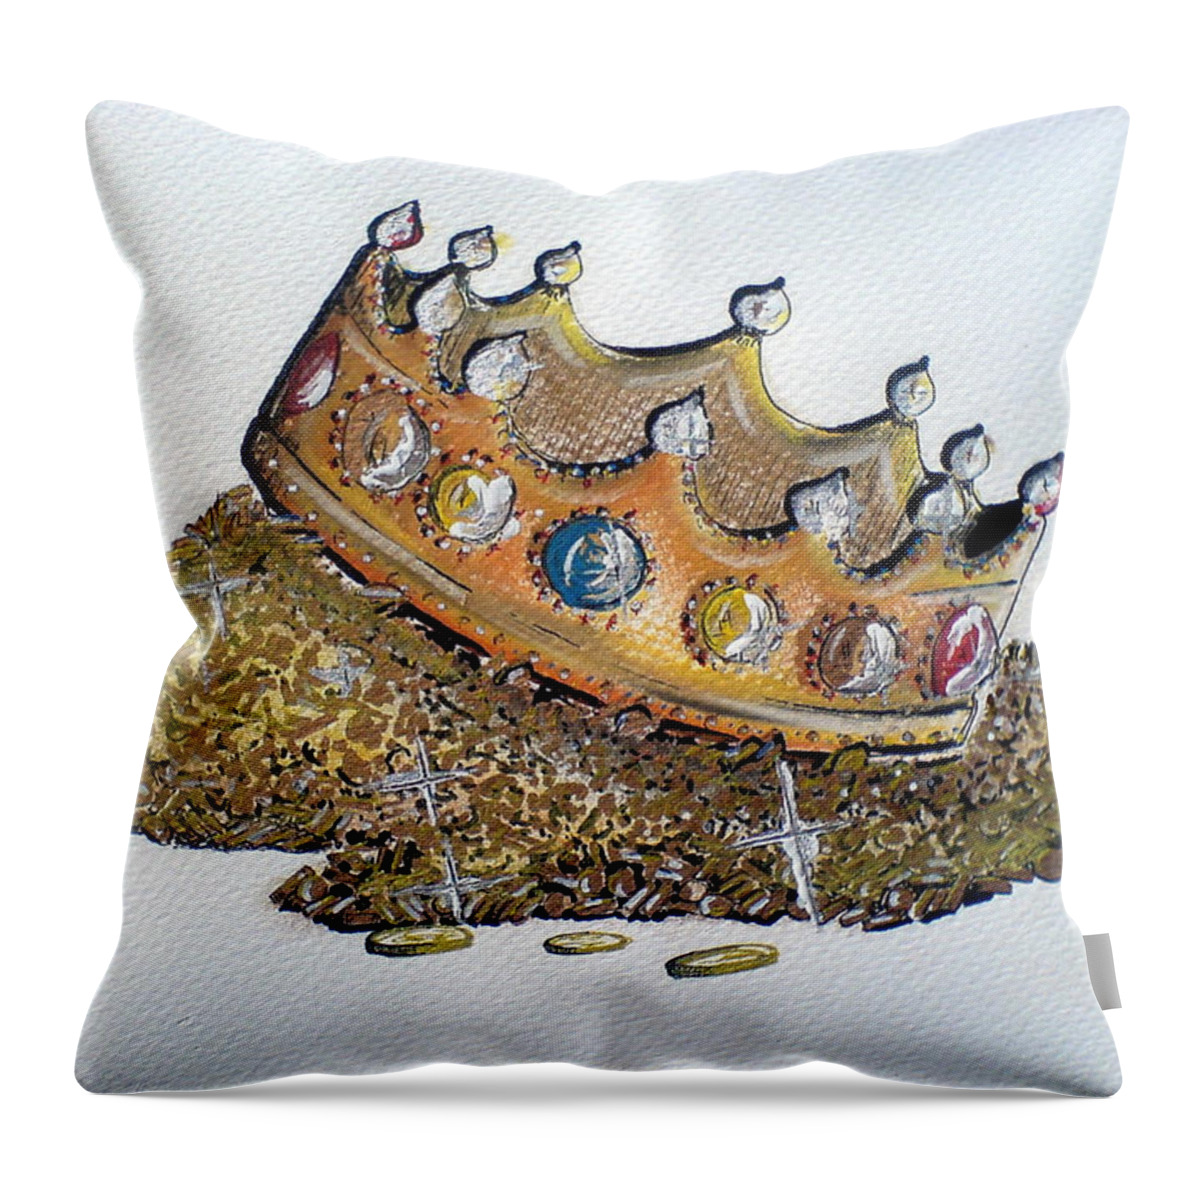 Ahonu Throw Pillow featuring the painting Aristocracy Disseminating Wealth by AHONU Aingeal Rose